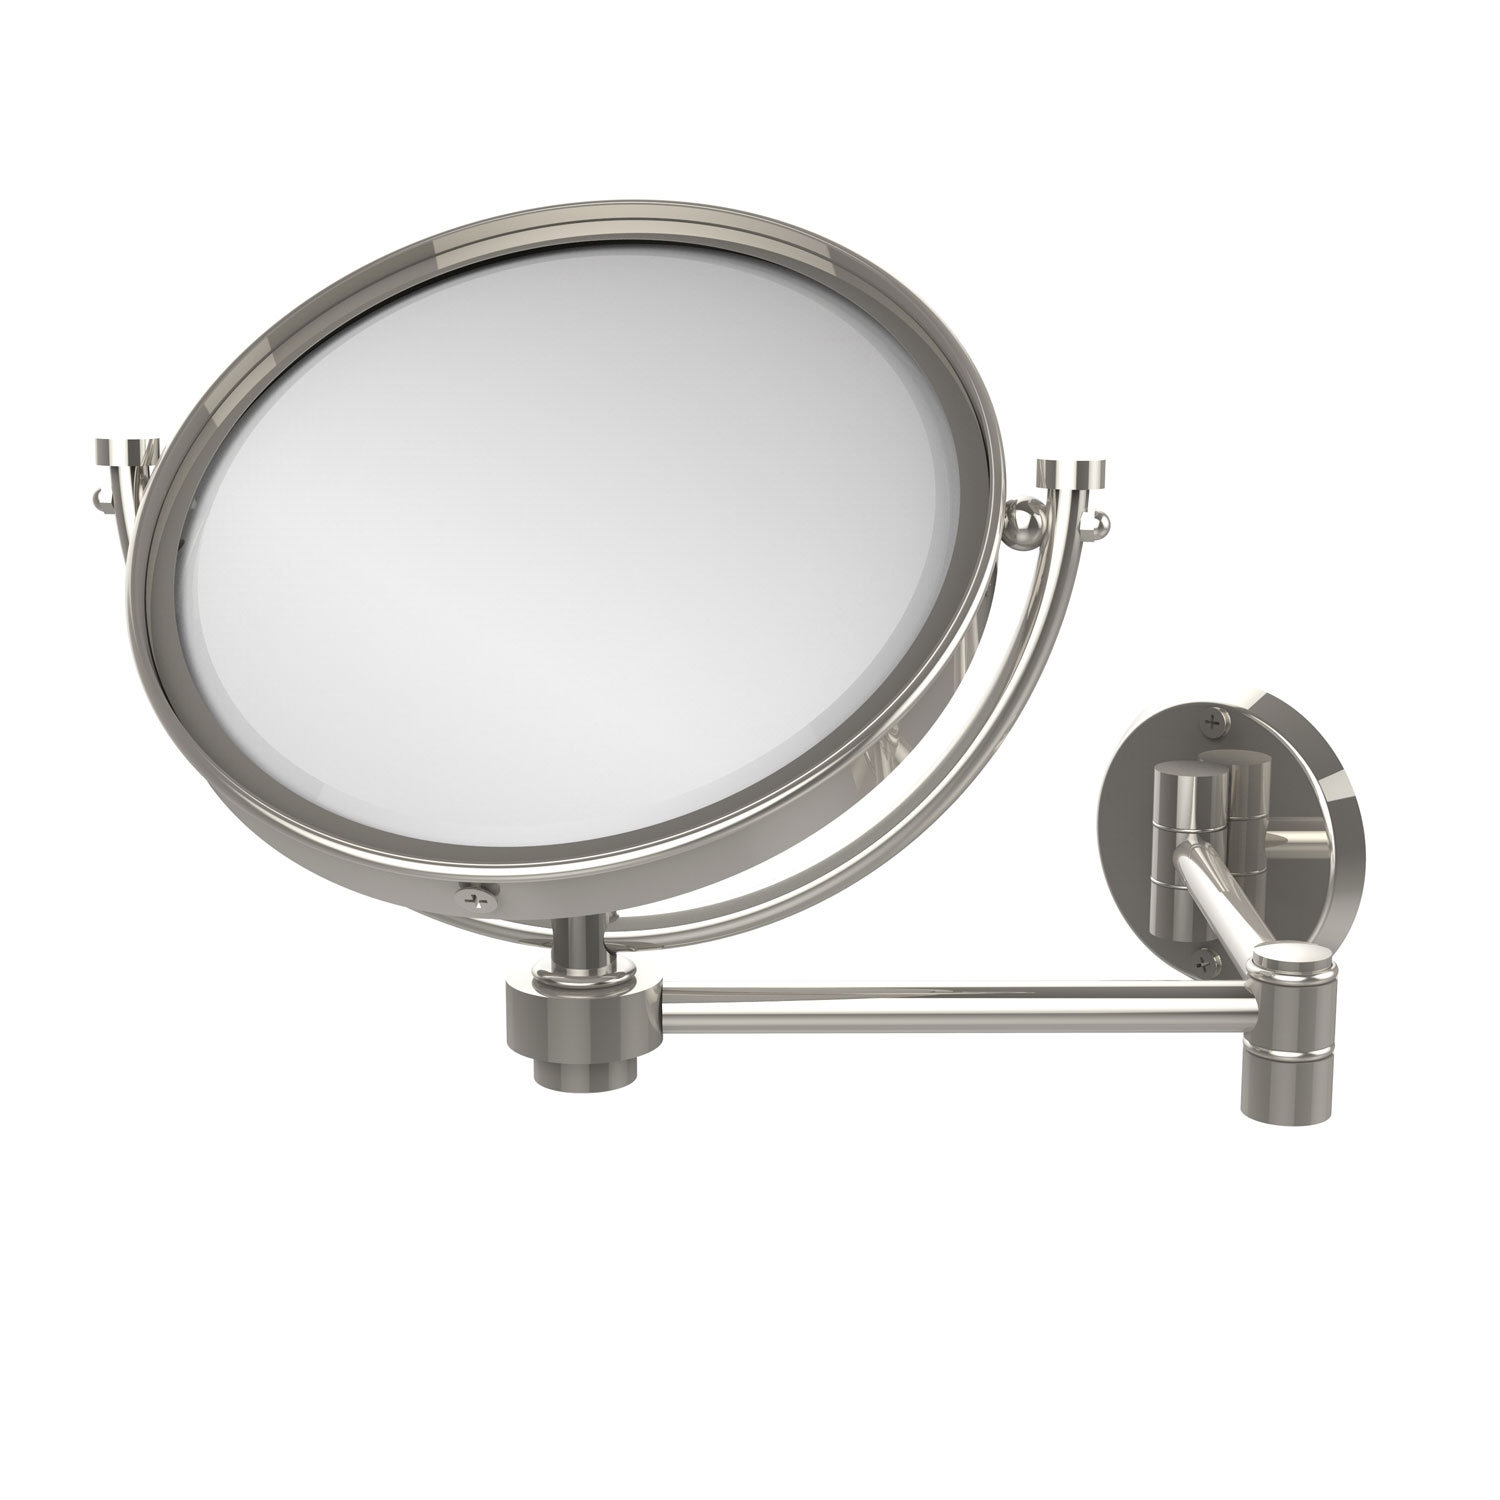 8 Inch Wall Mounted Extending Make-Up Mirror 5X Magnification, Polished Nickel